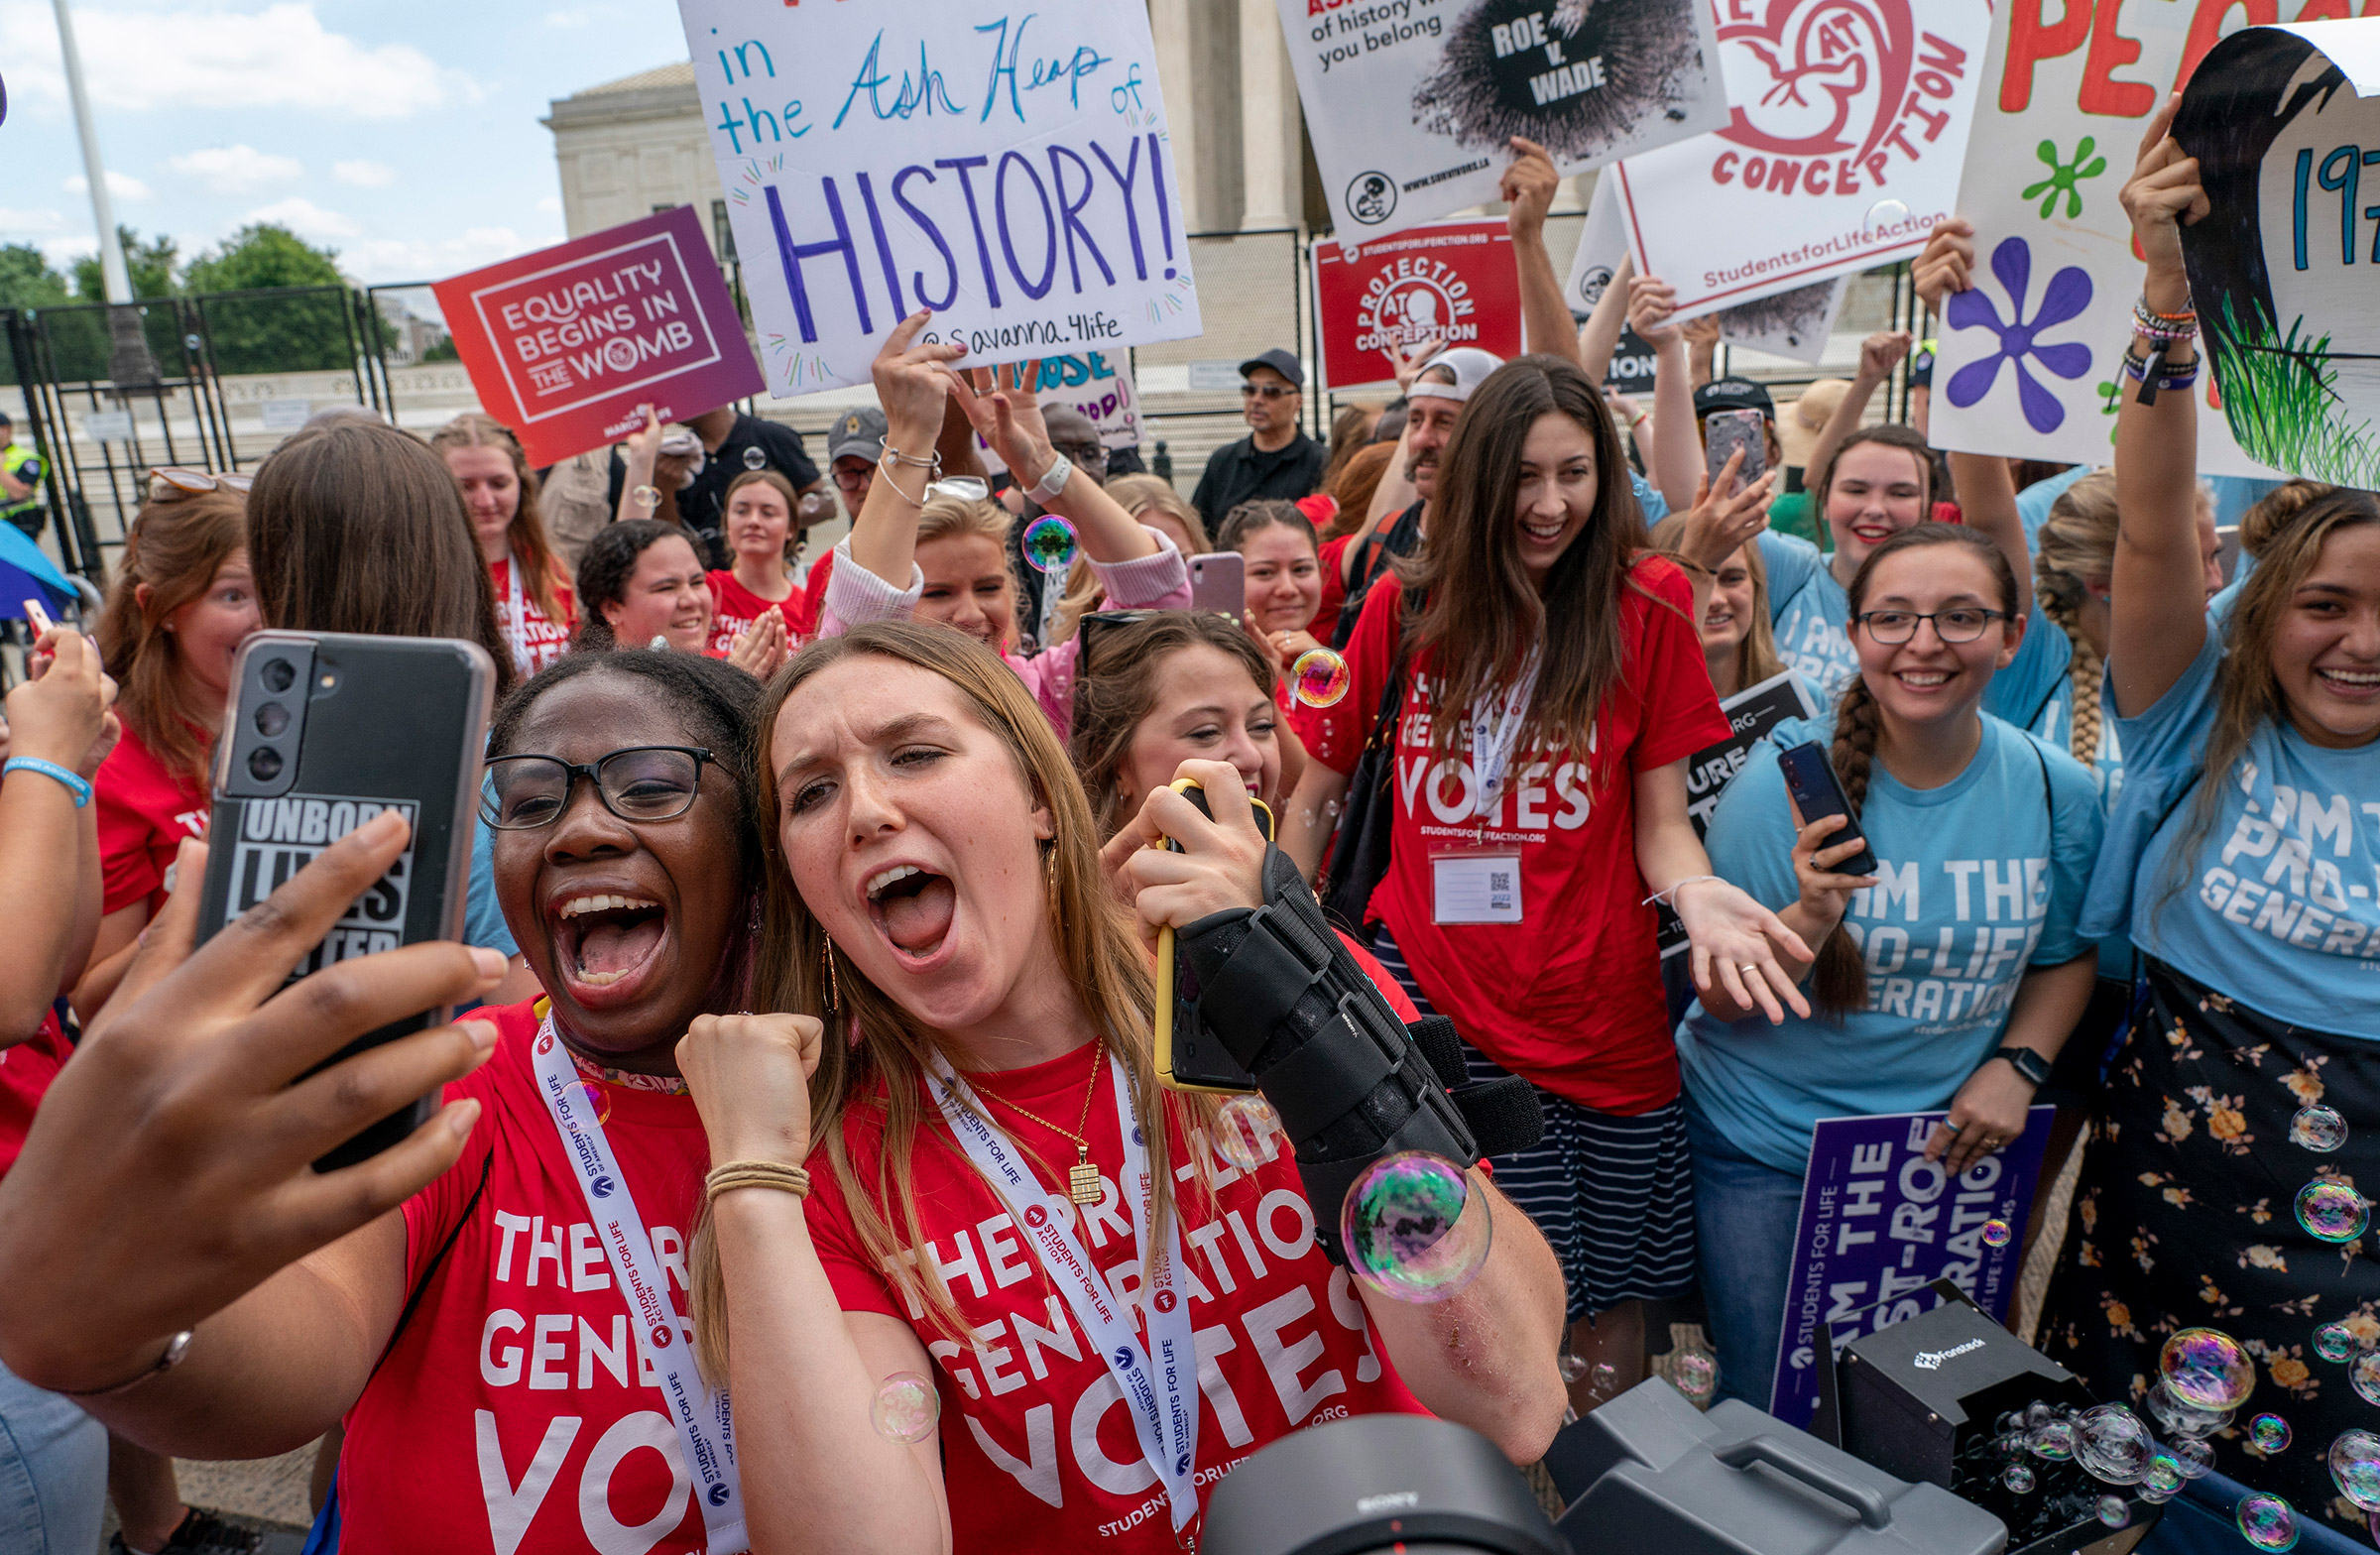 Anti-abortion protesters celebrate following the Supreme Court's decision to overturn Roe v. Wade in Washington, D.C., on June 24, 2022. (Gemunu Amarasinghe—AP)